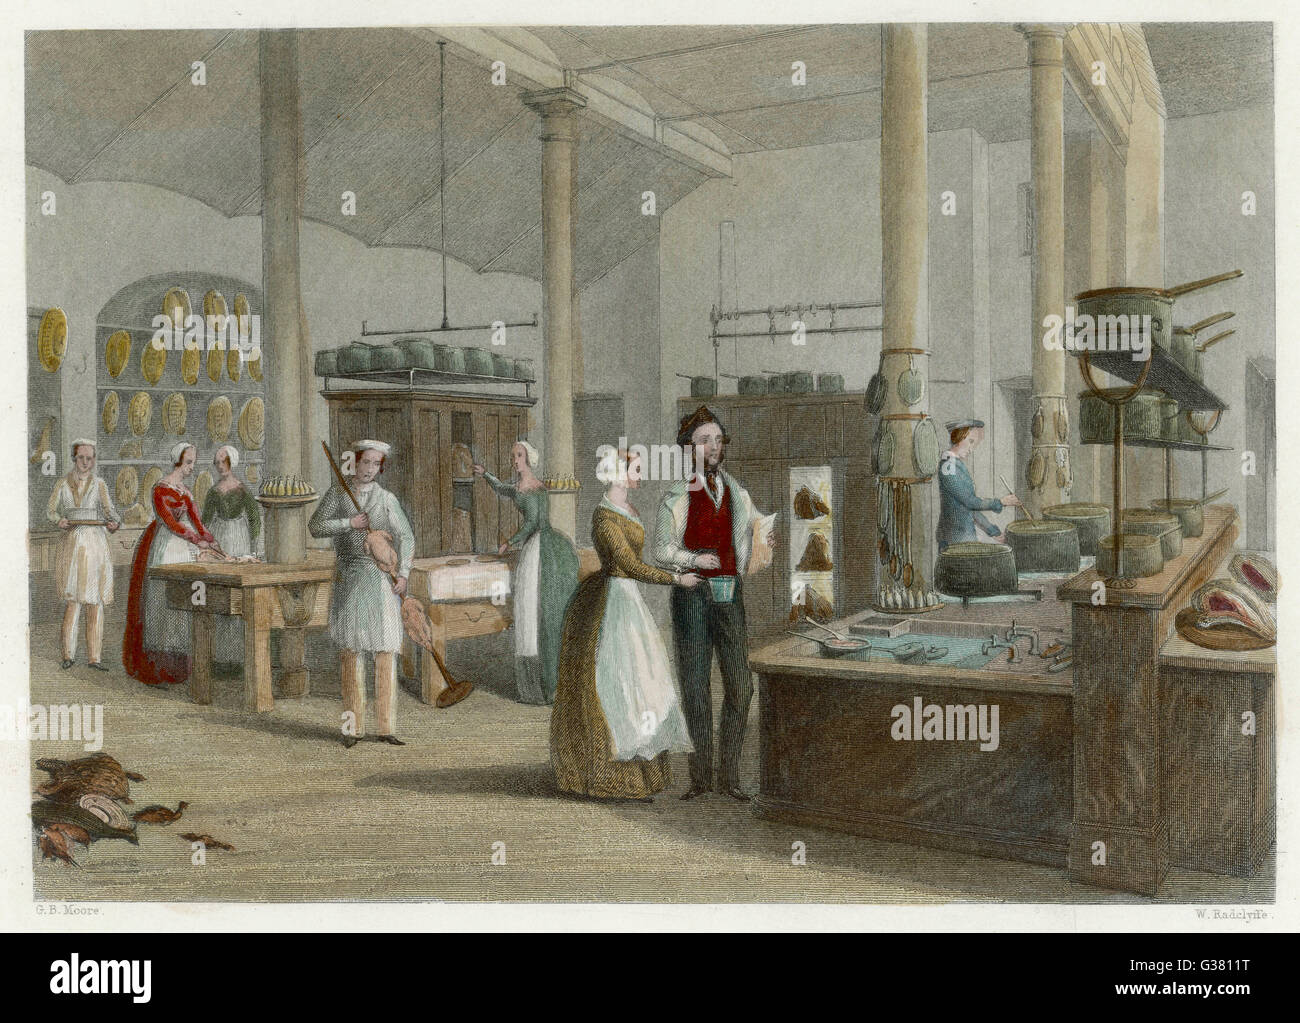 Soyer's kitchen at the Reform  Club, one of the notable  London gentlemen's clubs        Date: 1841 Stock Photo